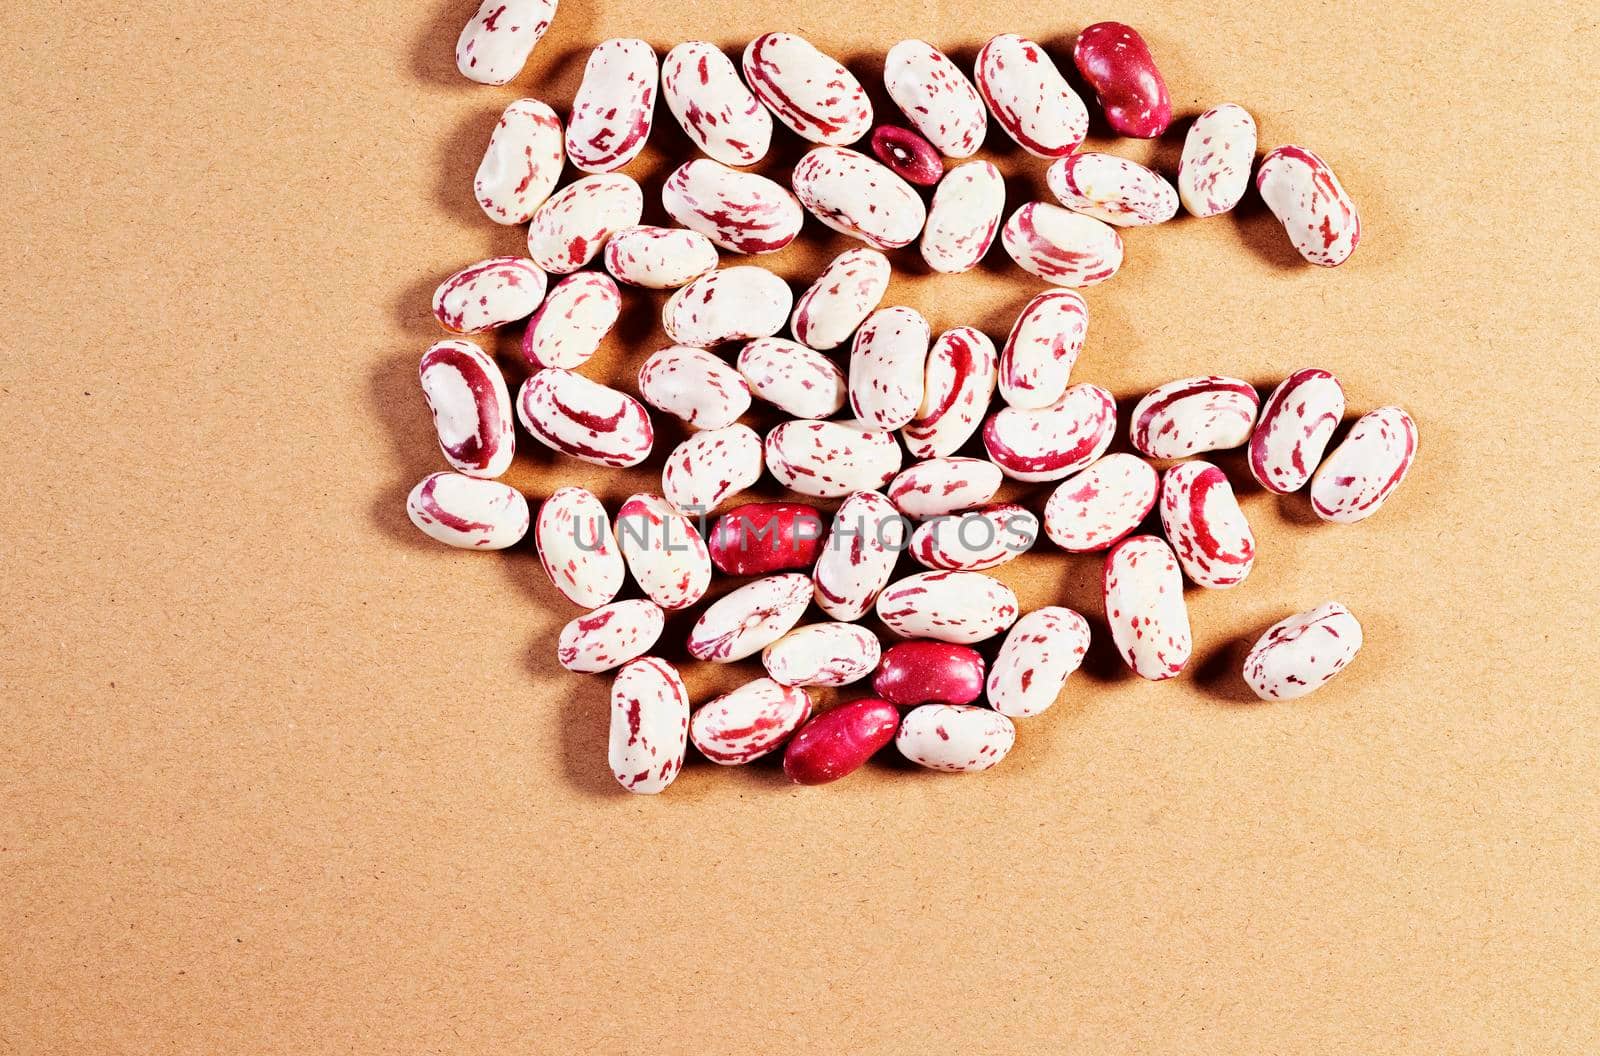 Fresh borlotti beans  on brown background , beans with red specks on creamy white background , common beans or pinto beans